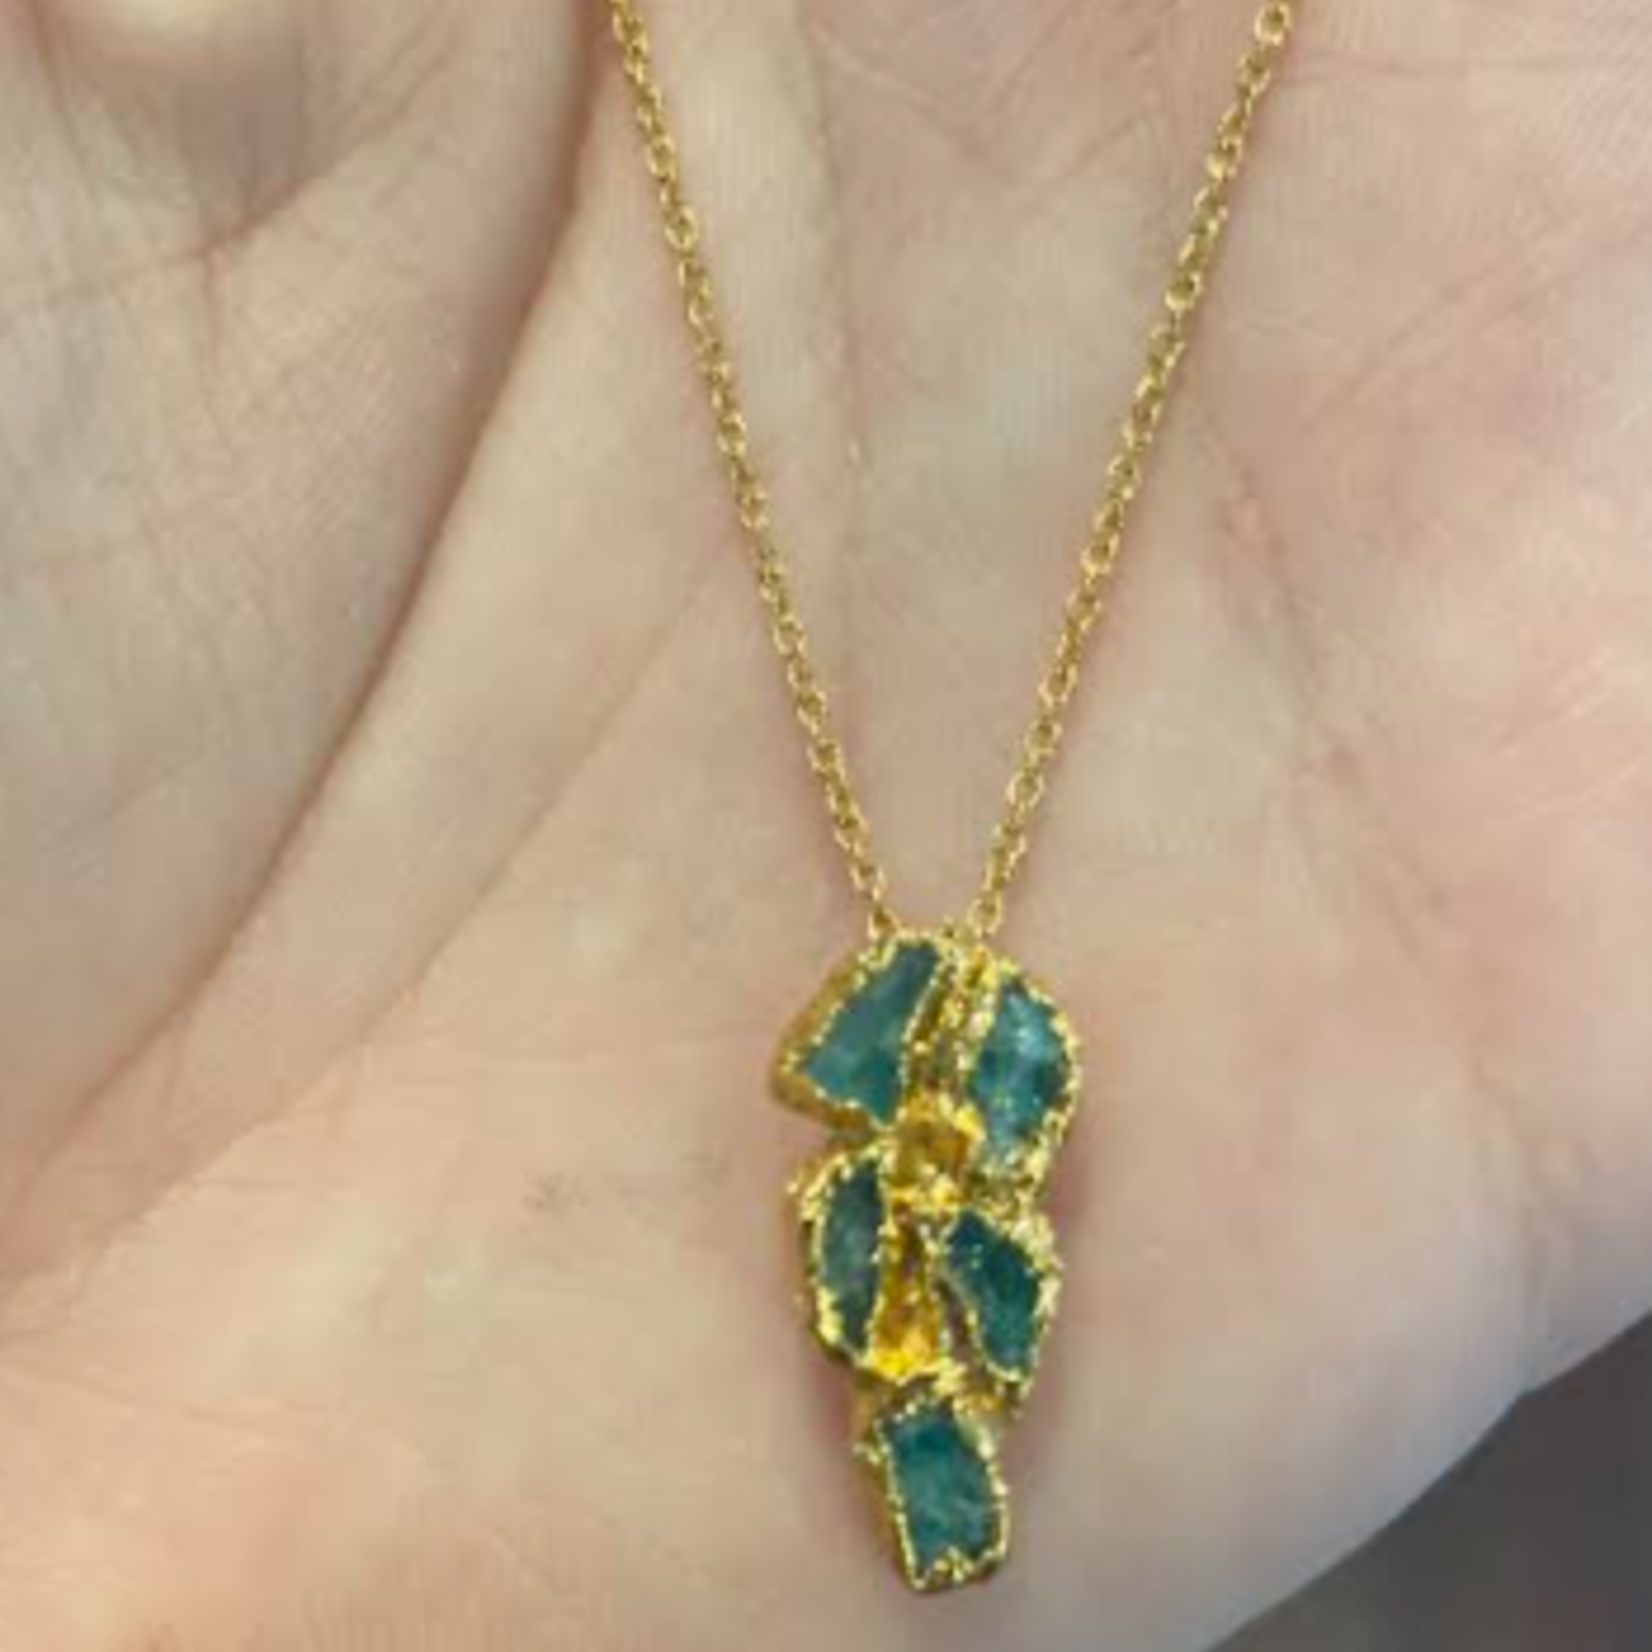 Emerald Chunk Charm Necklace - 24k Gold Over Brass